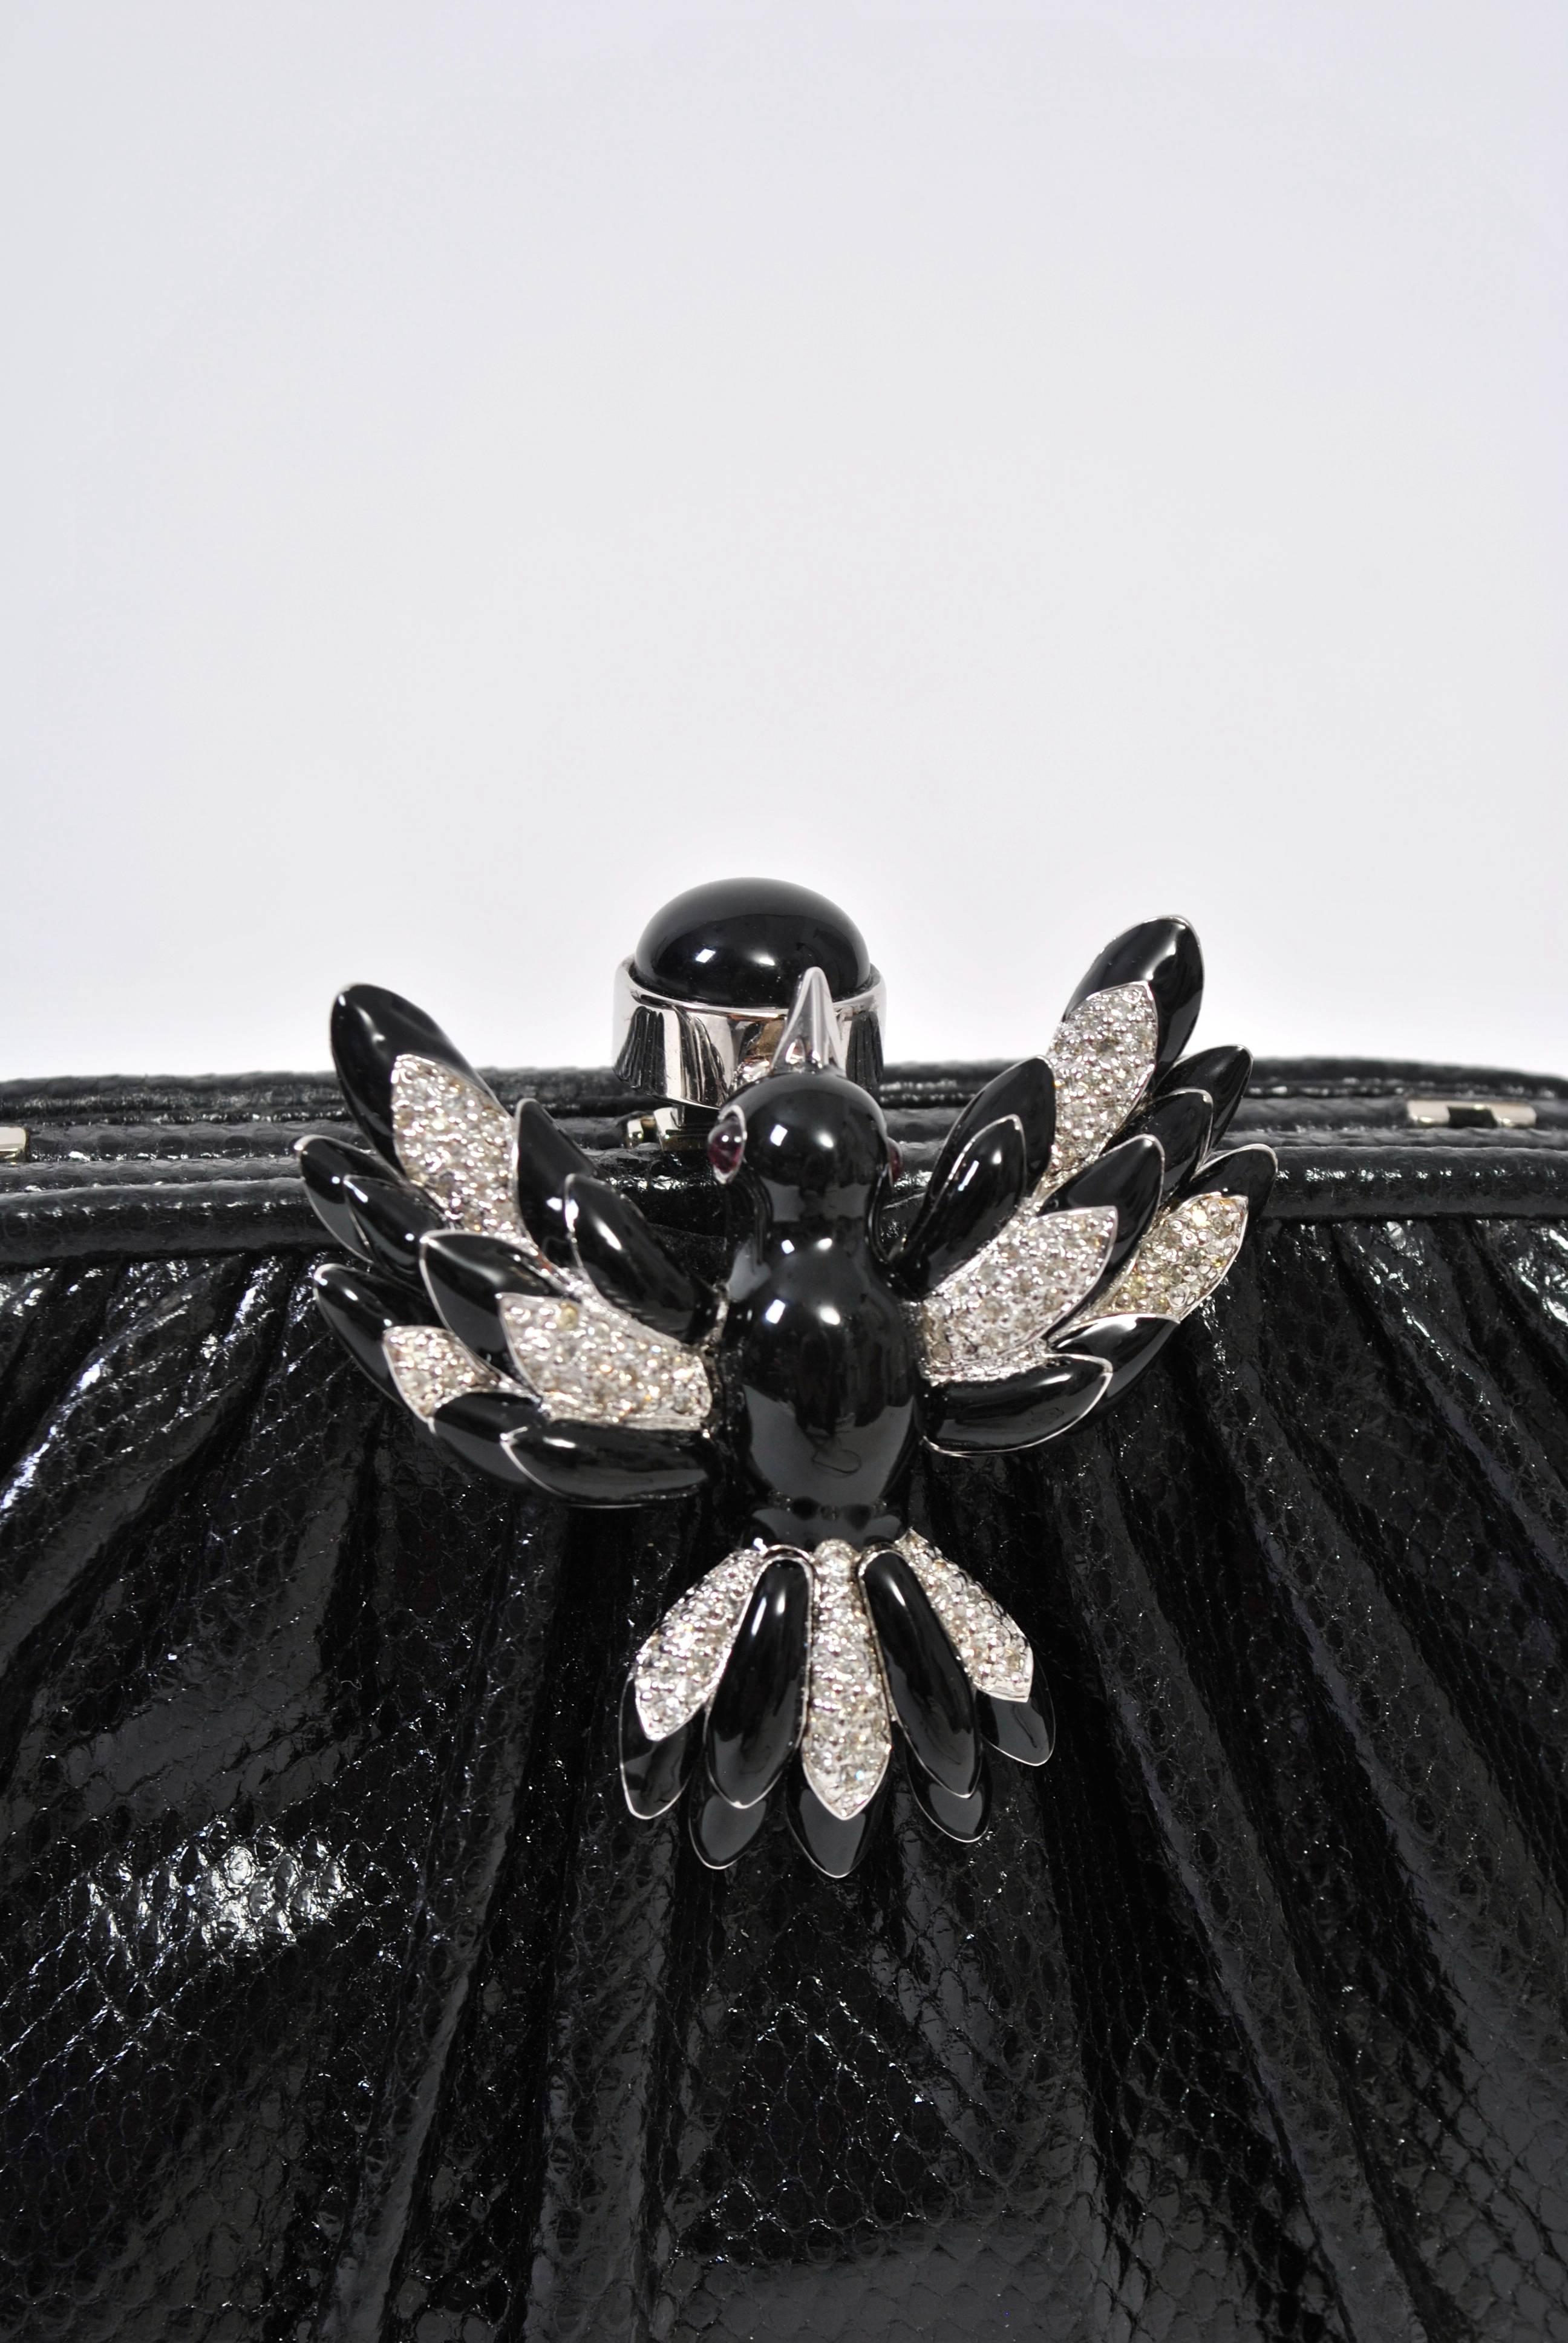 Black karung clutch by Judith Leiber perfectly embellished with a black enamel and rhinestone bird clasp. Converts to shoulder bag with narrow strap that conceals within. Nice interior with signature comb, mirror and change purse. 